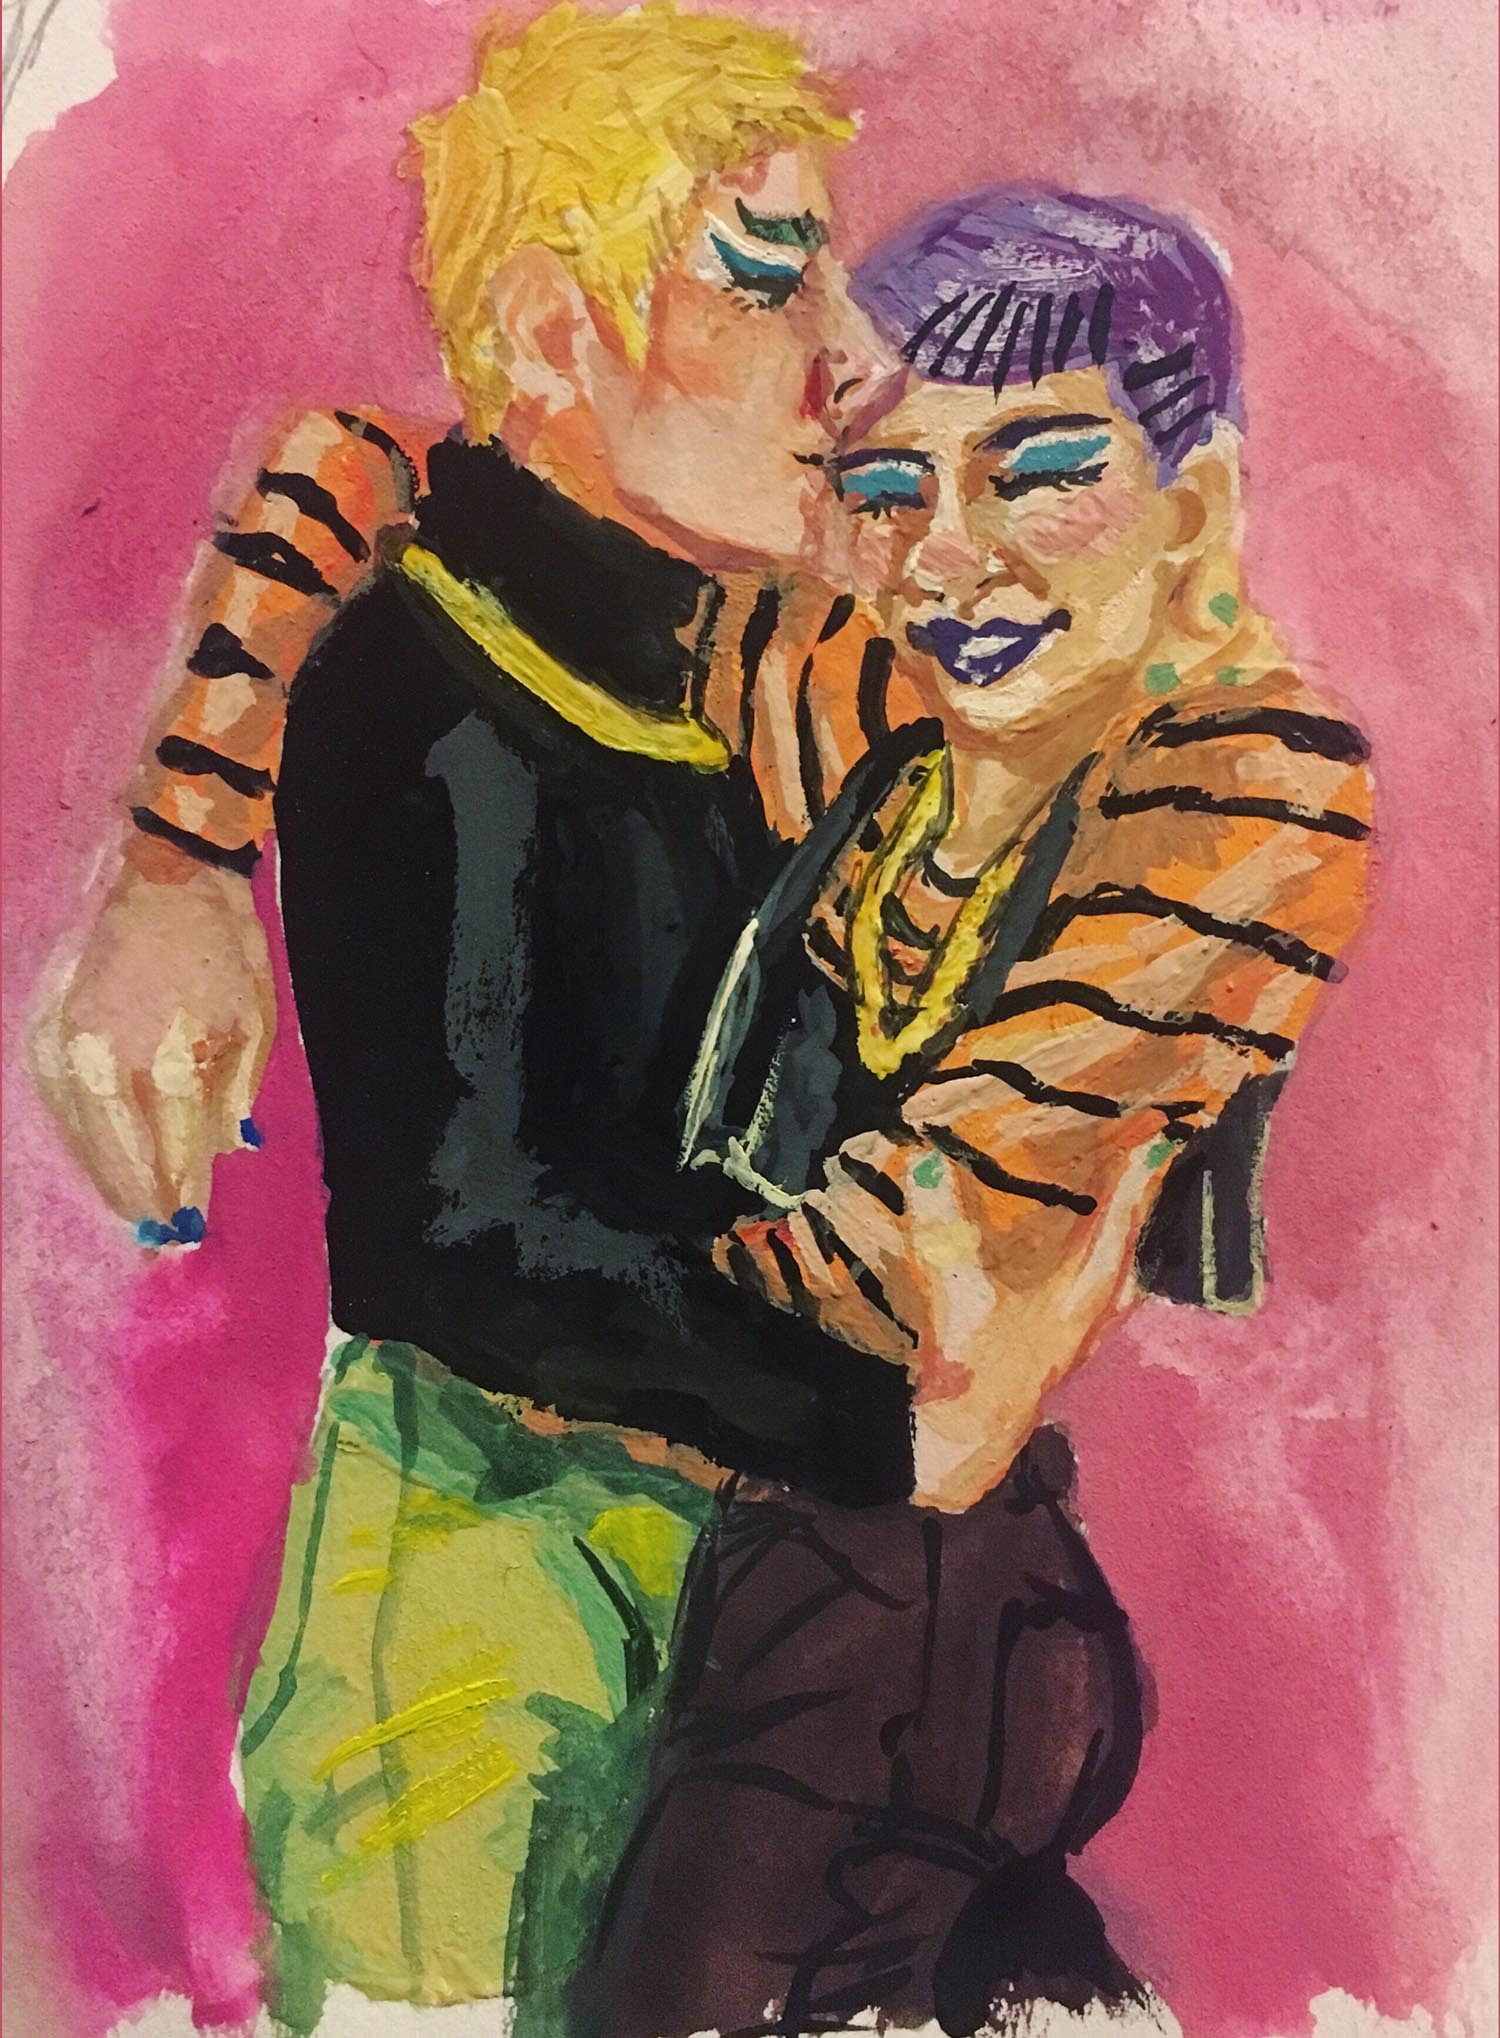 blonde (jupiter) kissing the forehead of purple-haired (chip) as they embrace. blonde is wearing a black turtleneck, gold chain, and green pants. purple hair is wearing a lot of bobby pins, a gold chain, black crop top over orange and black striped long sleeve shirt, maroon pants. both wear heavy bright blue eyeliner.